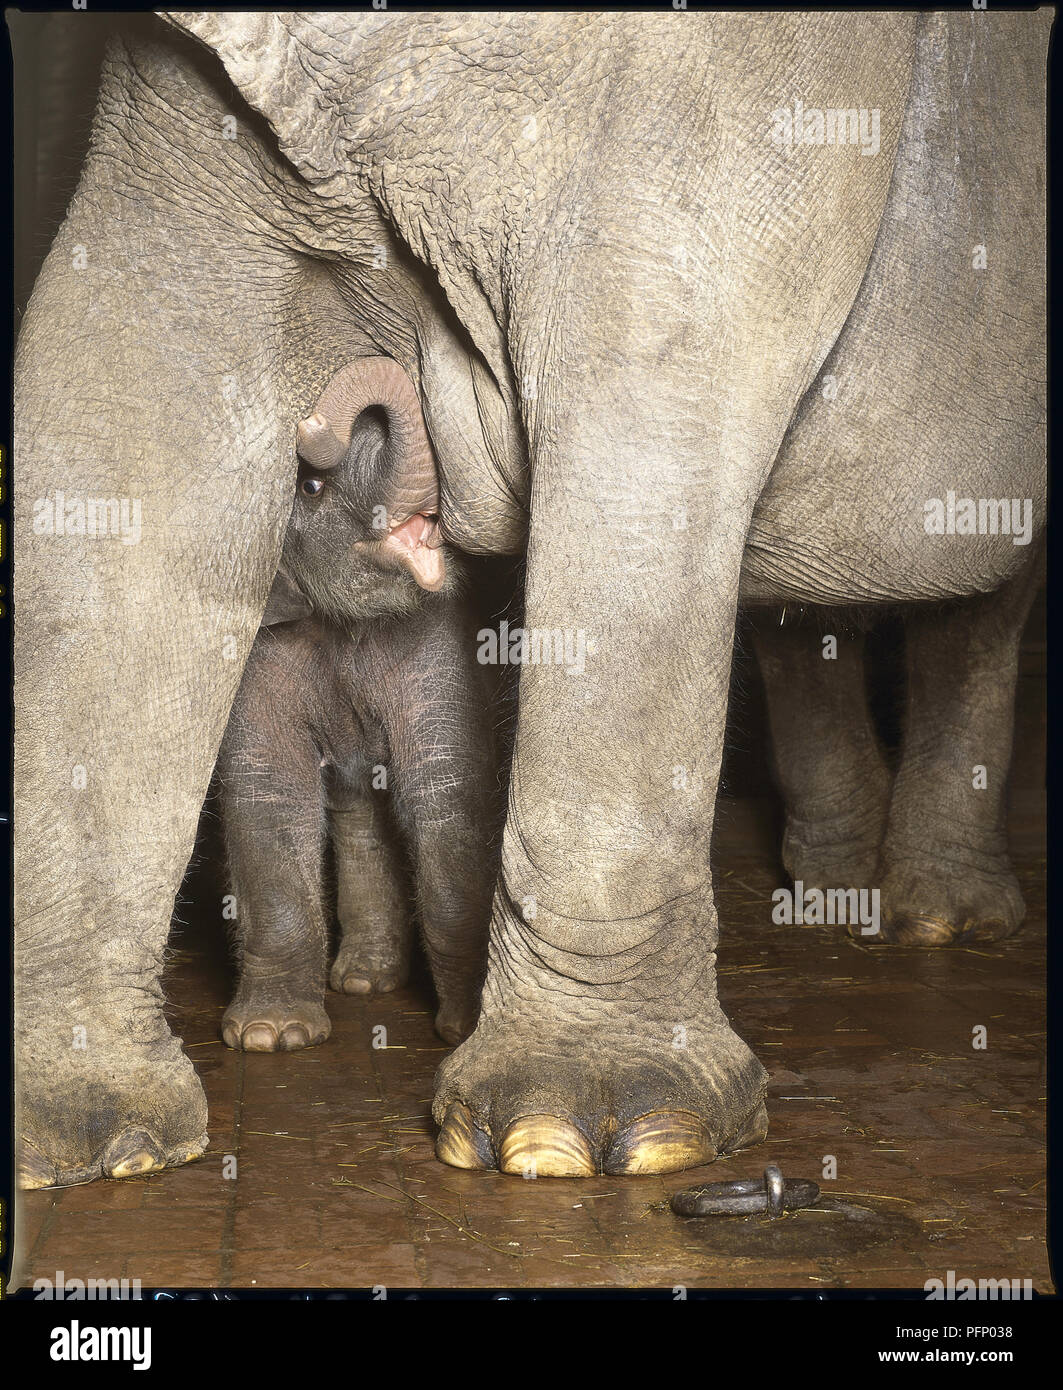 Elephas maximus, asian elephant, a baby elephant nurses from its mother's teat while curling up its trunk and standing beneath its parent's massive body, suckling baby Stock Photo